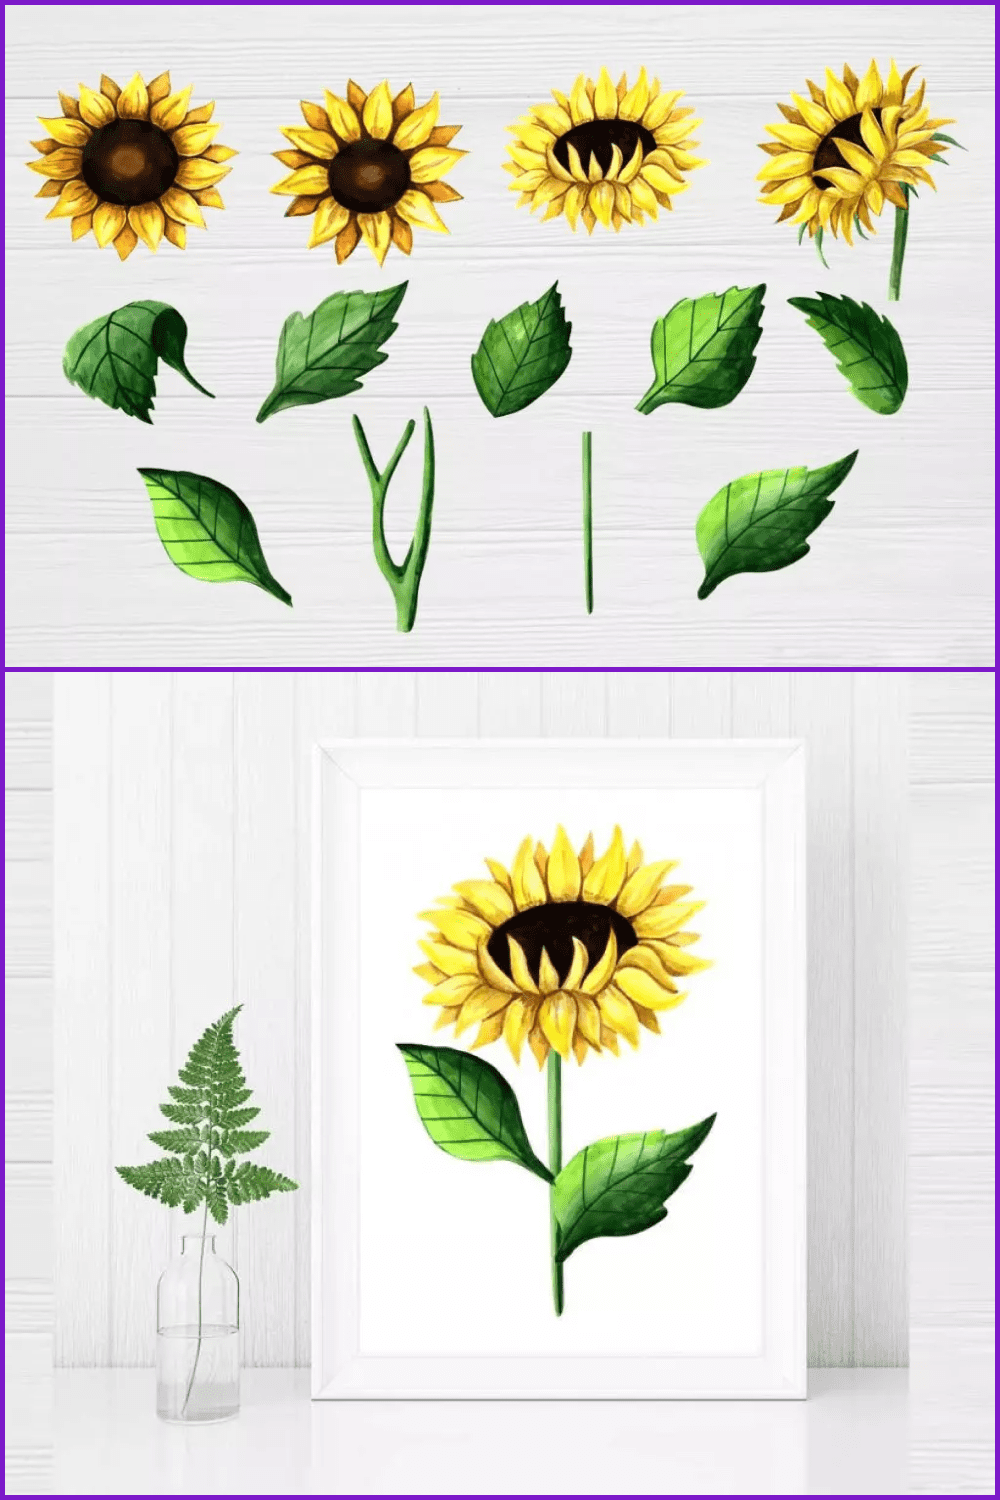 Realistic sunflowers and parts of it.